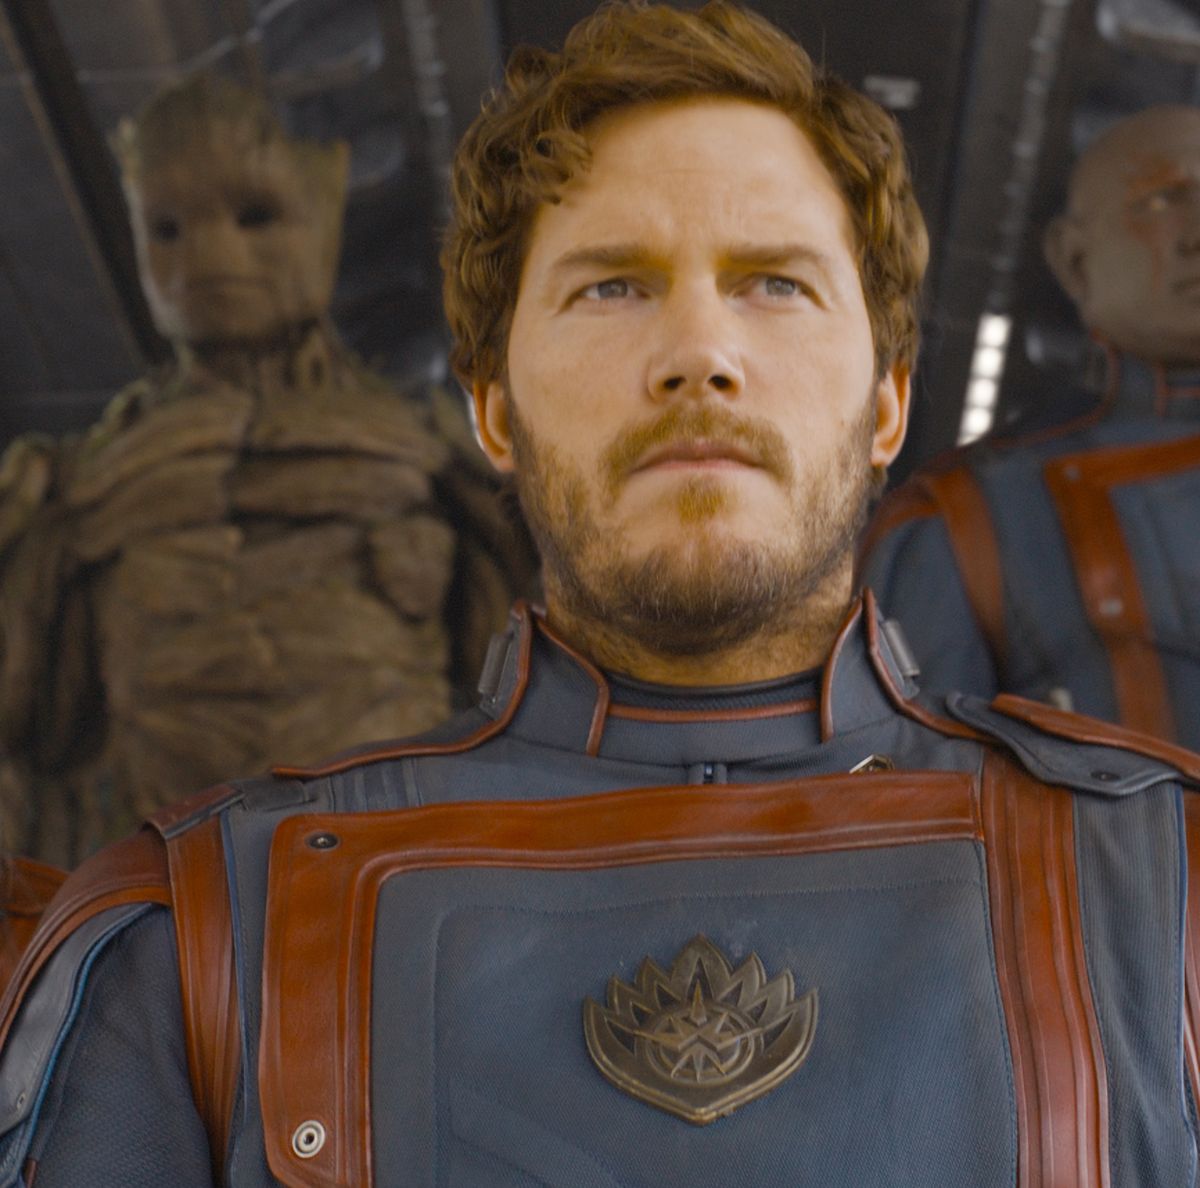 Star-Lord Was A Villain Long Before His Defining Moment In